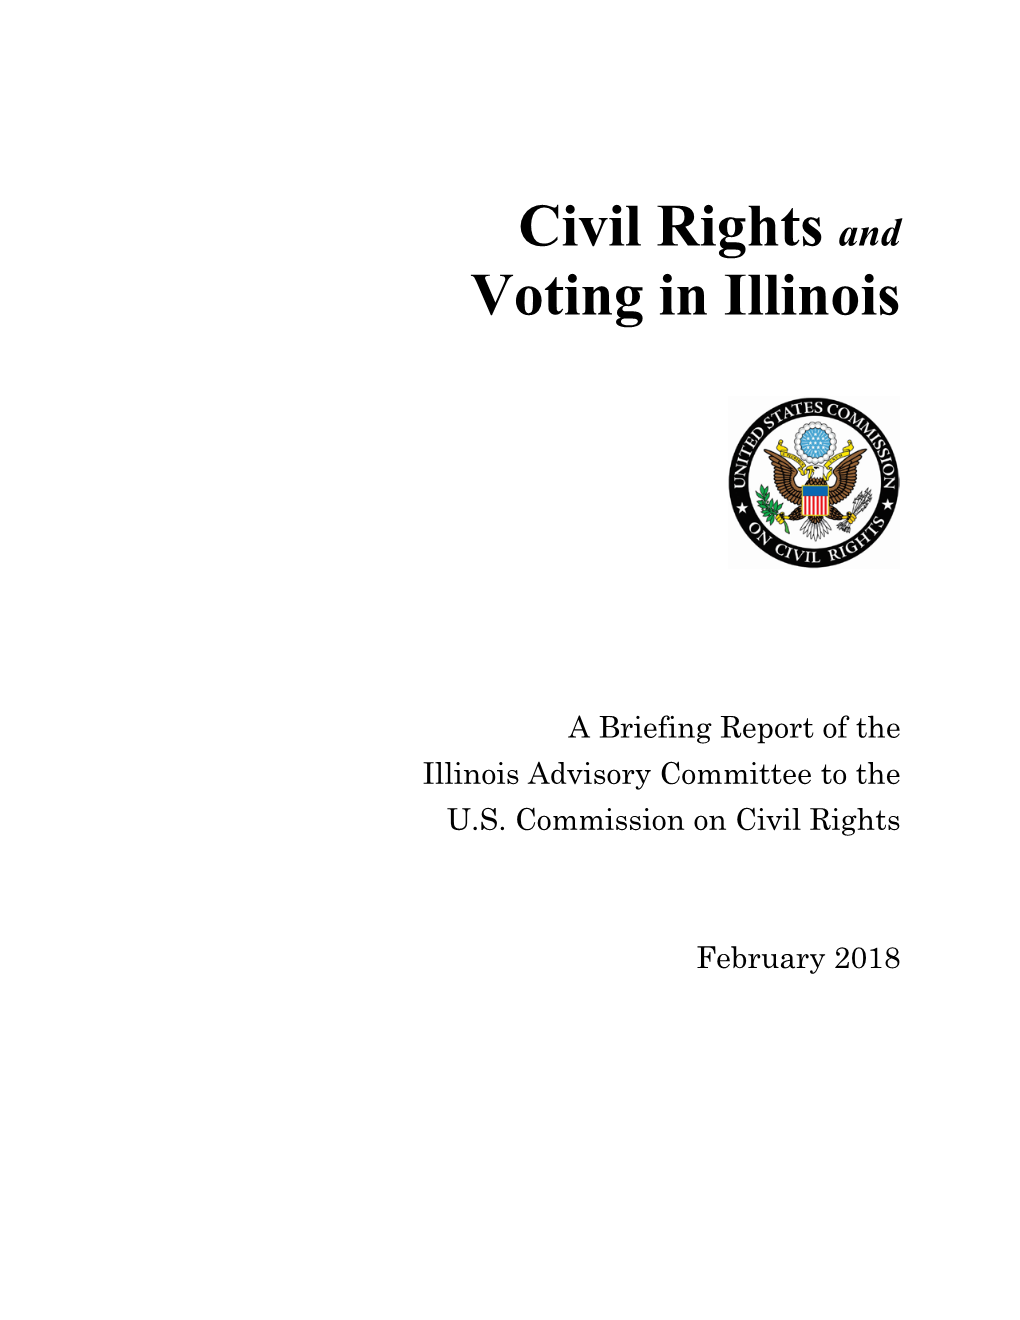 Civil Rights and Voting in Illinois